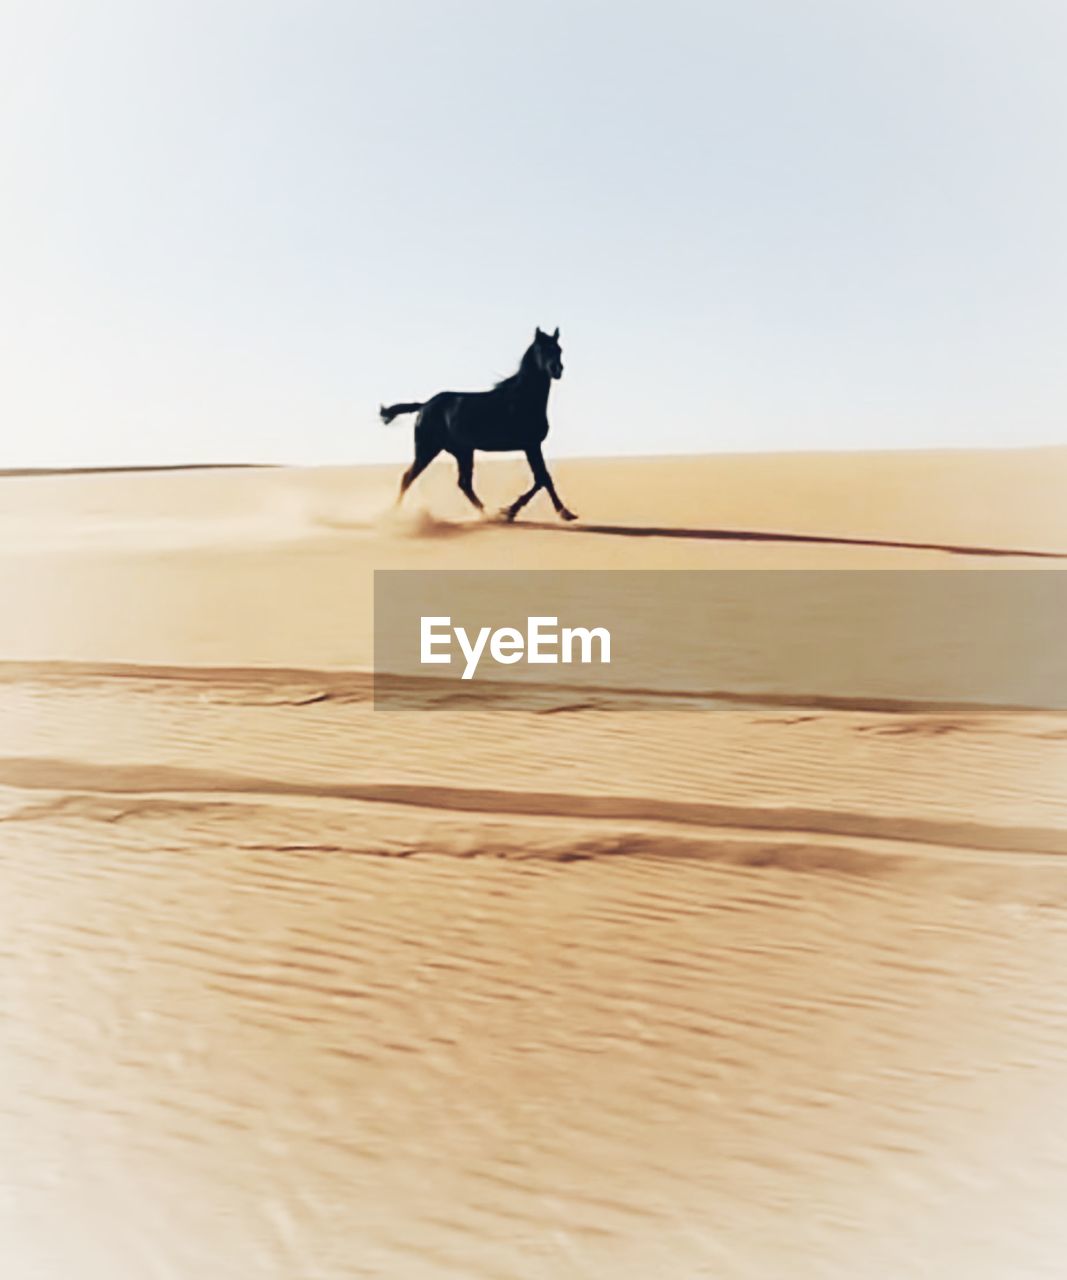 animal, animal themes, erg, land, mammal, natural environment, domestic animals, nature, sky, desert, one animal, sand, landscape, animal wildlife, full length, dune, environment, side view, sand dune, copy space, pet, day, dog, silhouette, scenics - nature, motion, outdoors, clear sky, no people, beach, arid climate, horizon, walking, beauty in nature